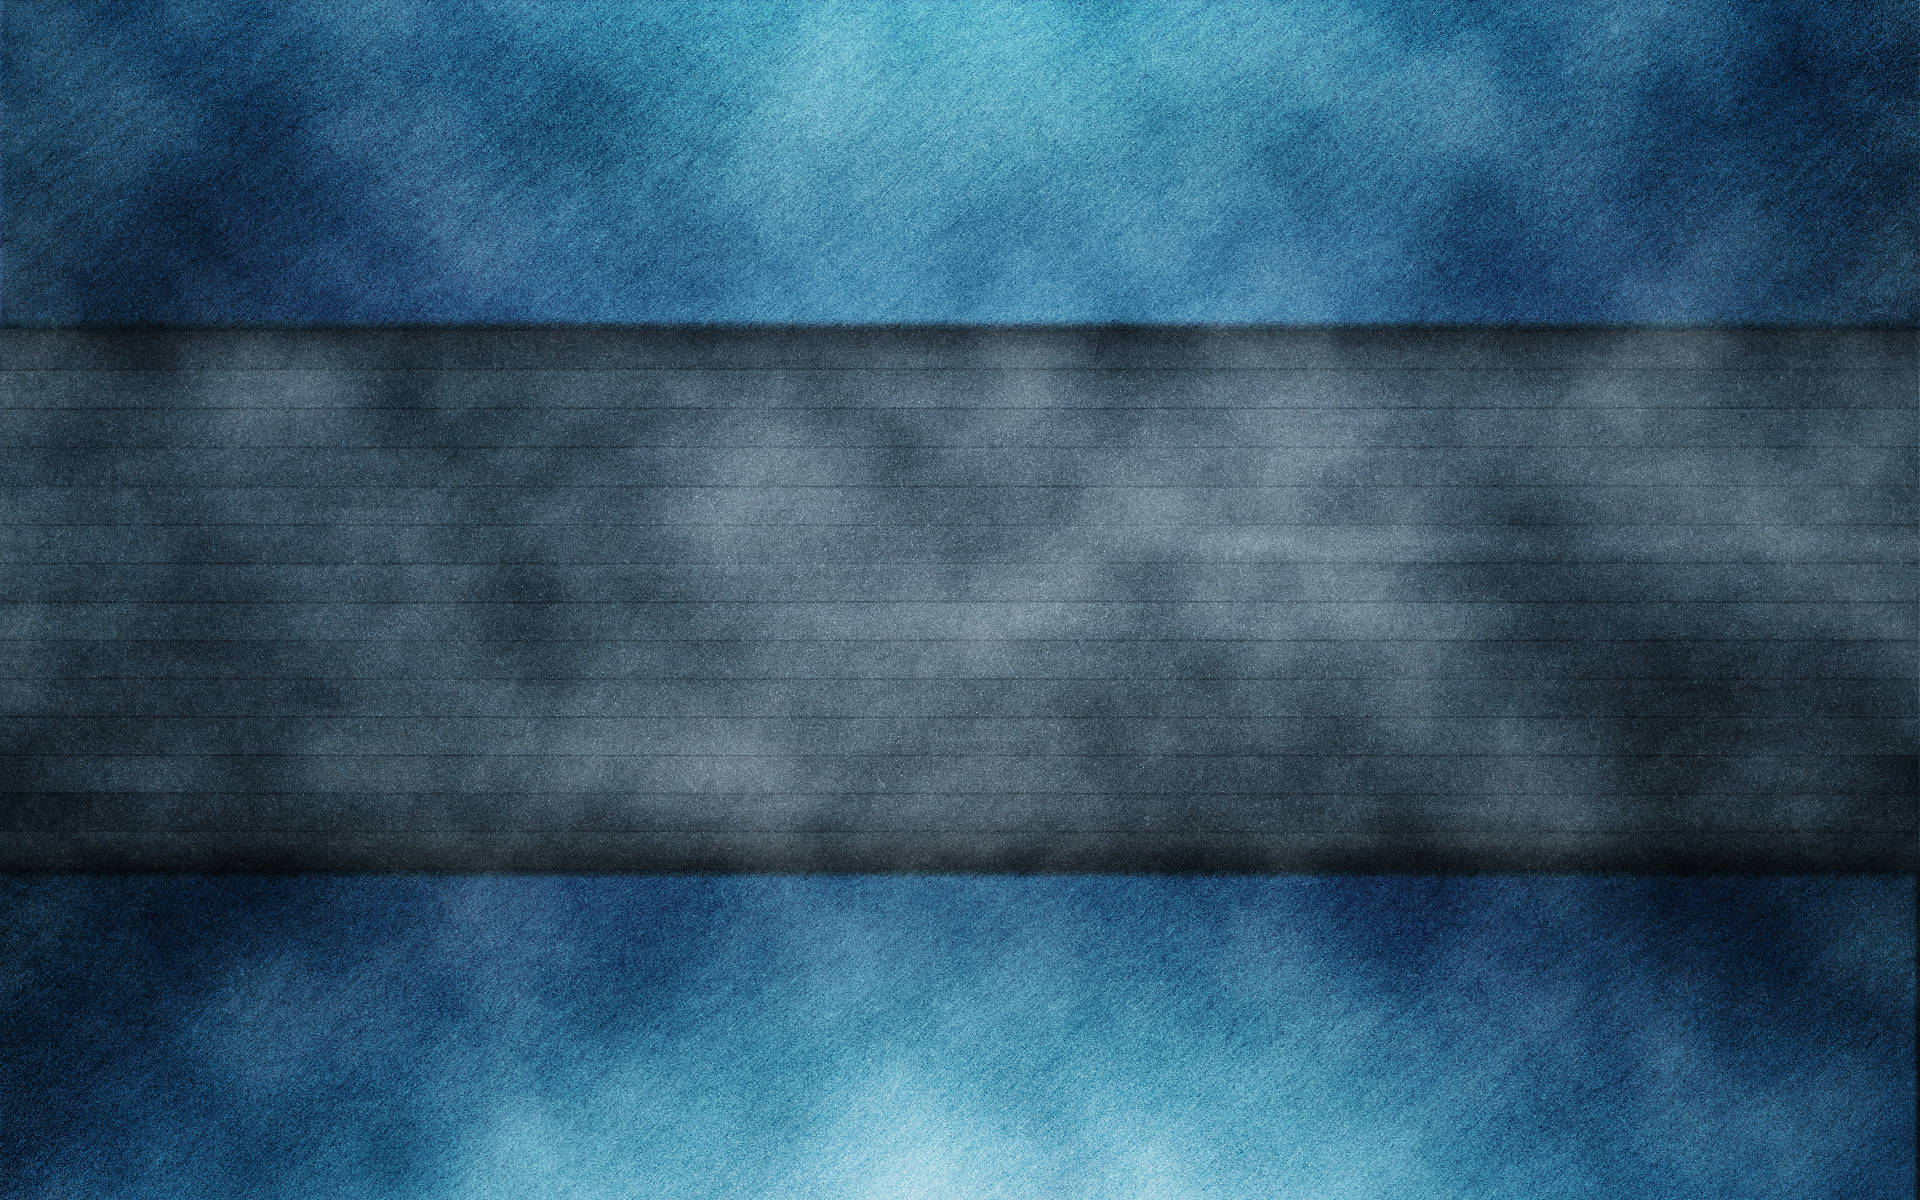 Bars With Gray And Blue Texture Background